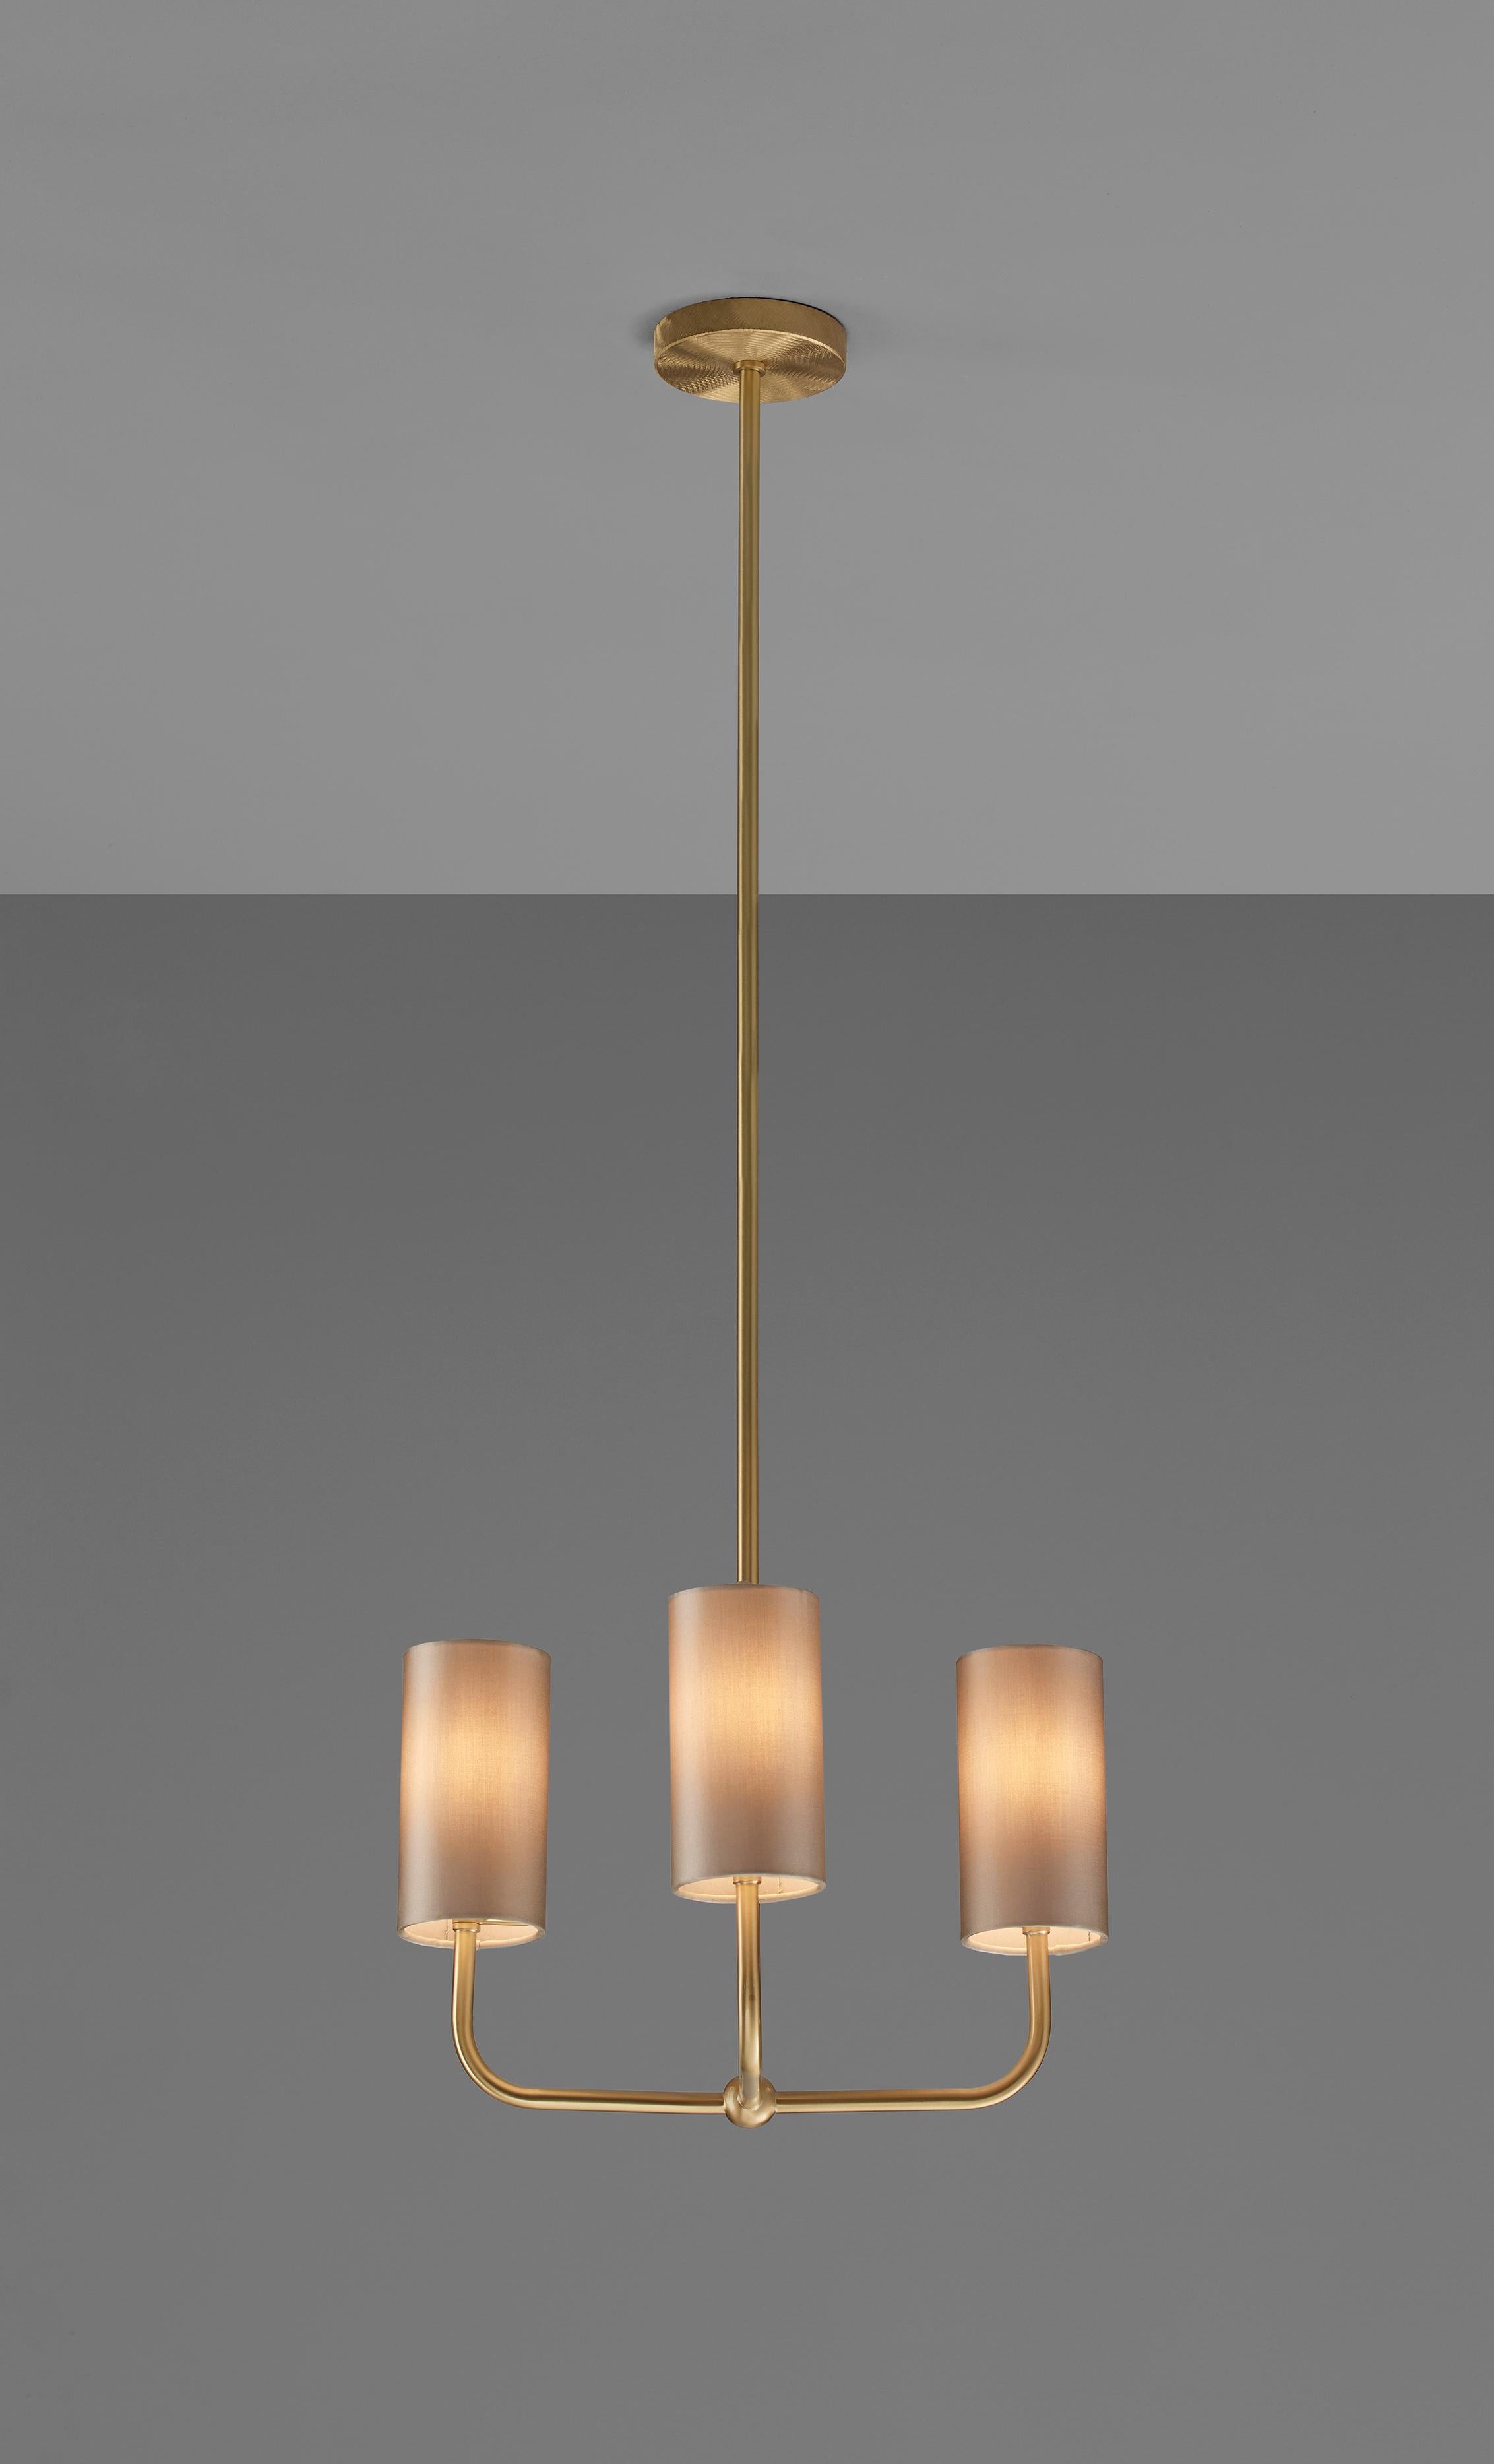 This pendant is a modern take on tradition. Beautifully crafted with elegant materials including brushed brass and sateen shades. The tall, timeless shades add a modern touch to the classic motif base, giving a familiar, yet forward looking